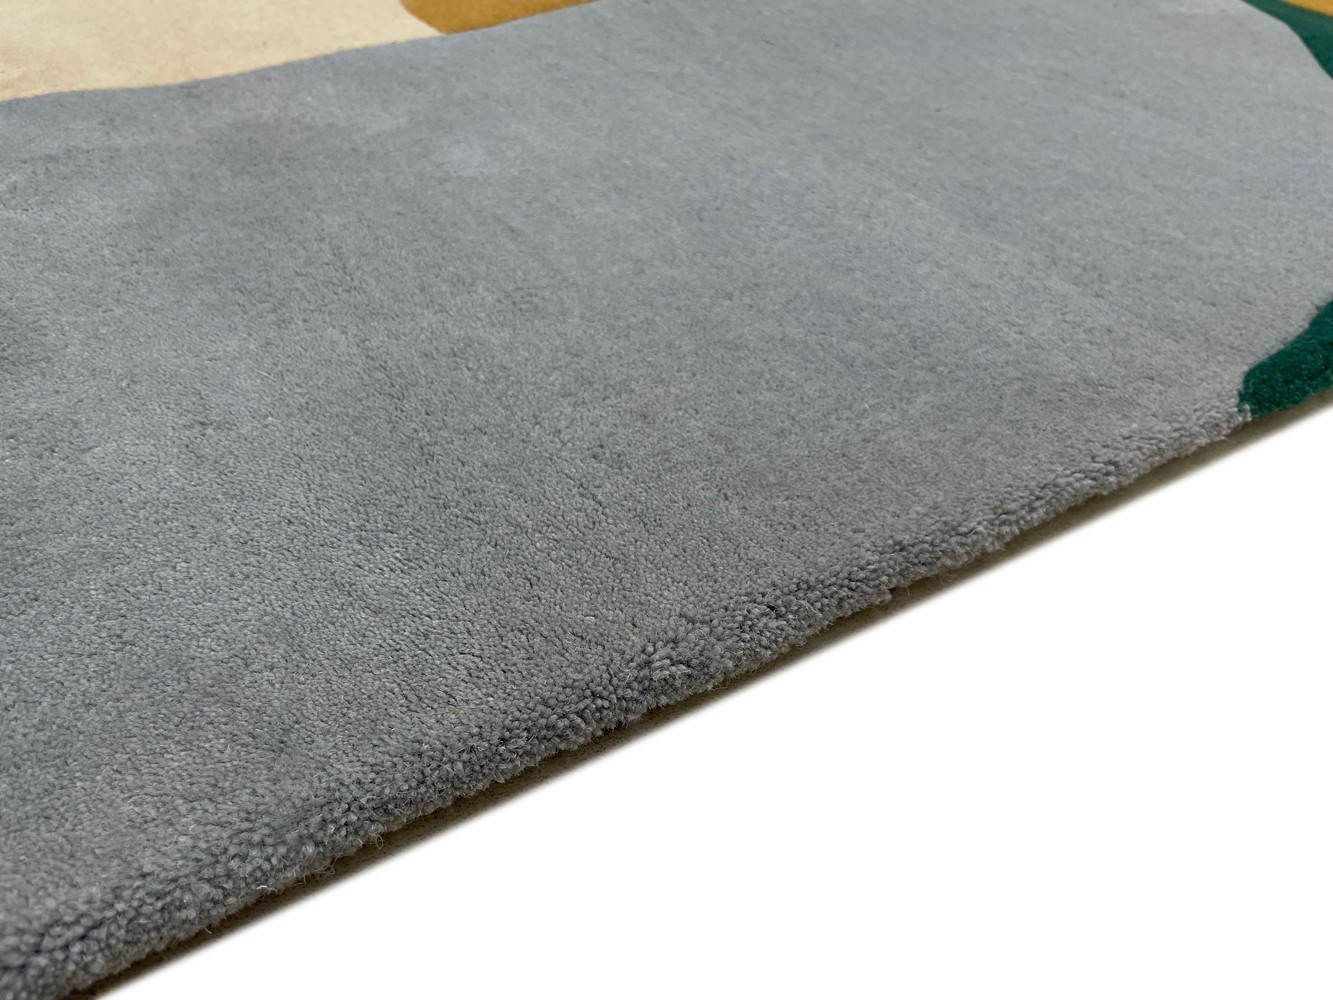 Montage Rug - Hand Tufted (HT0) Wool Rug - (152 x 229 cm)